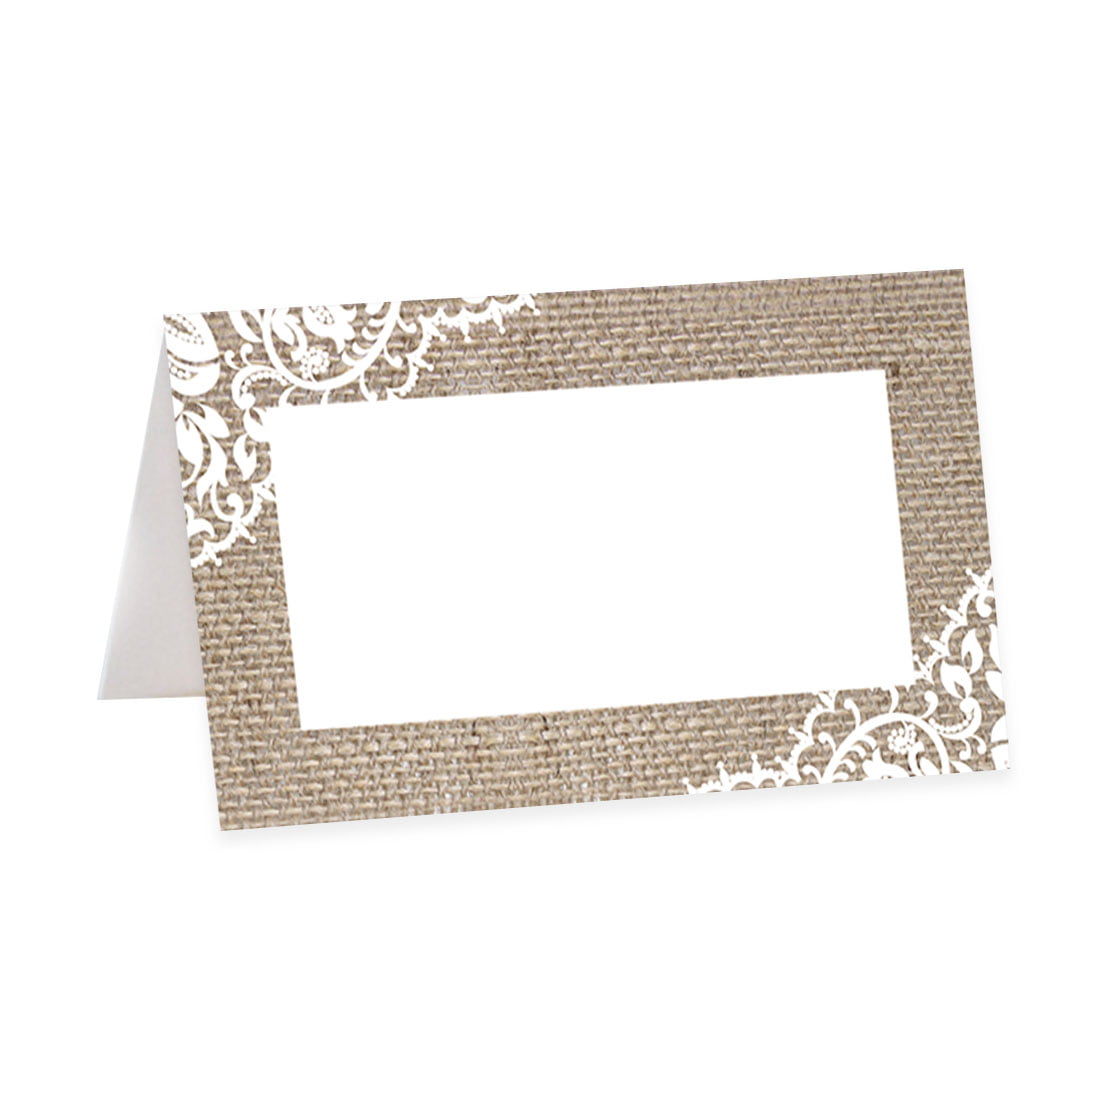 Vintage Burlap & Lace Wedding Table Seating Name Place Cards 